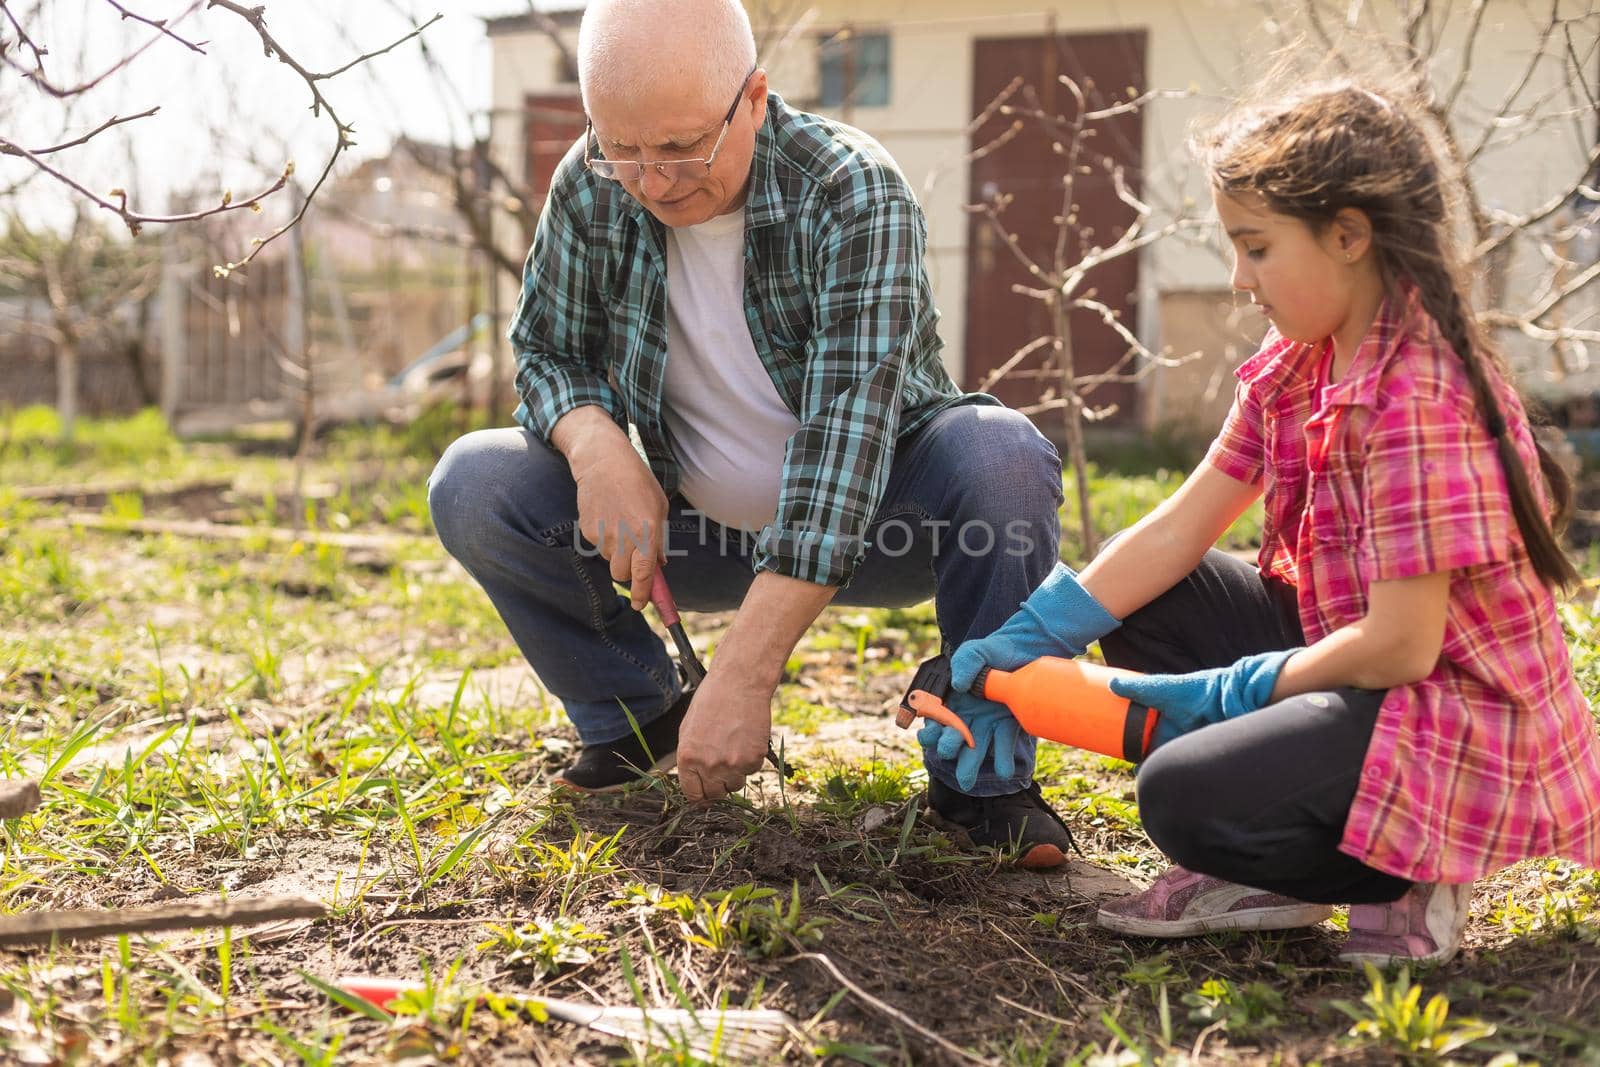 gardening, grandfather and granddaughter in the garden pruning trees.